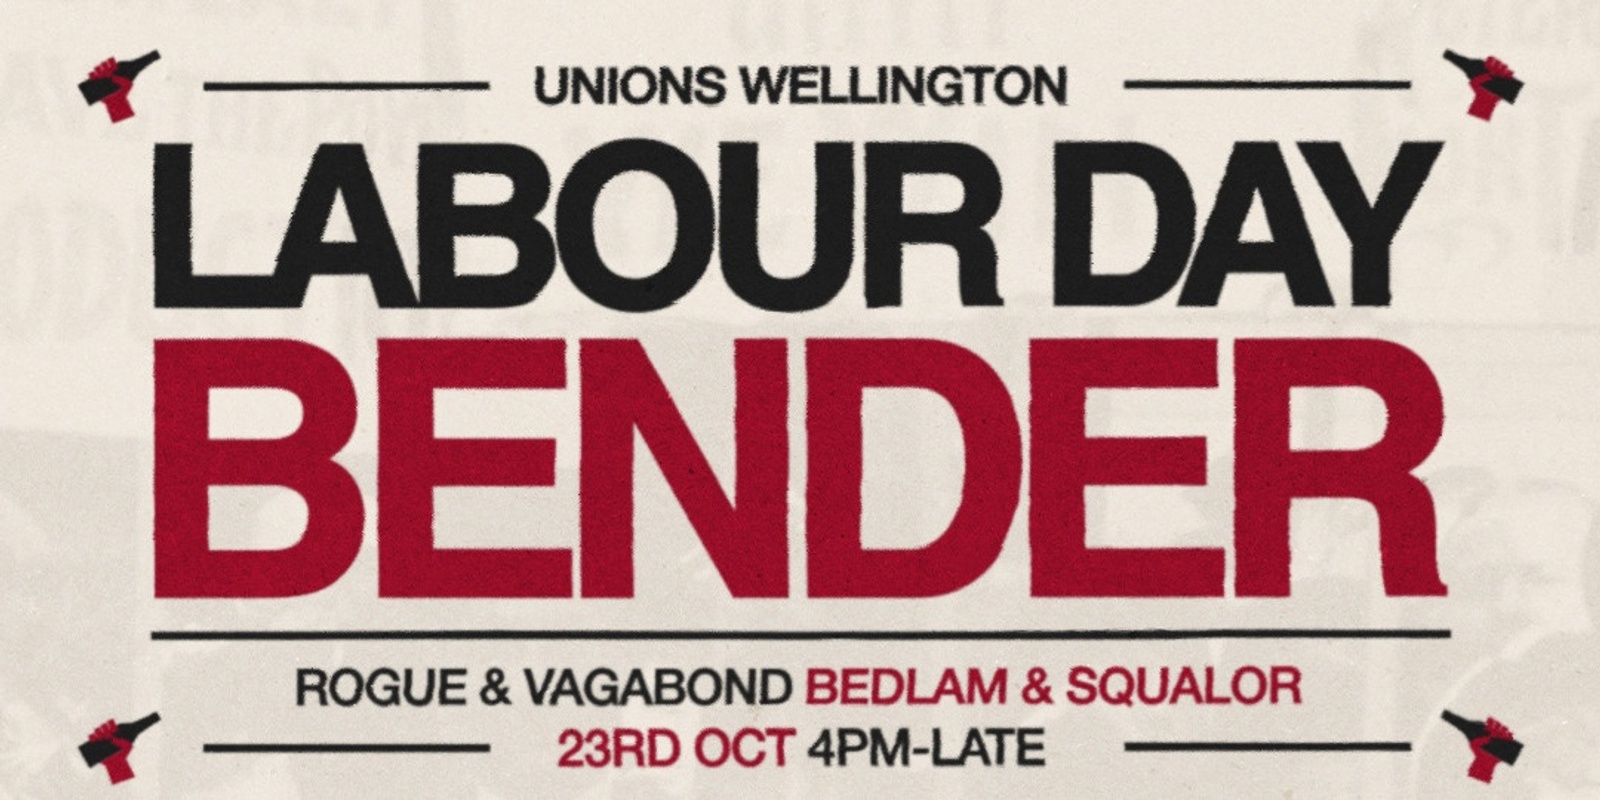 Banner image for LABOUR DAY BENDER with UNIONS WELLINGTON